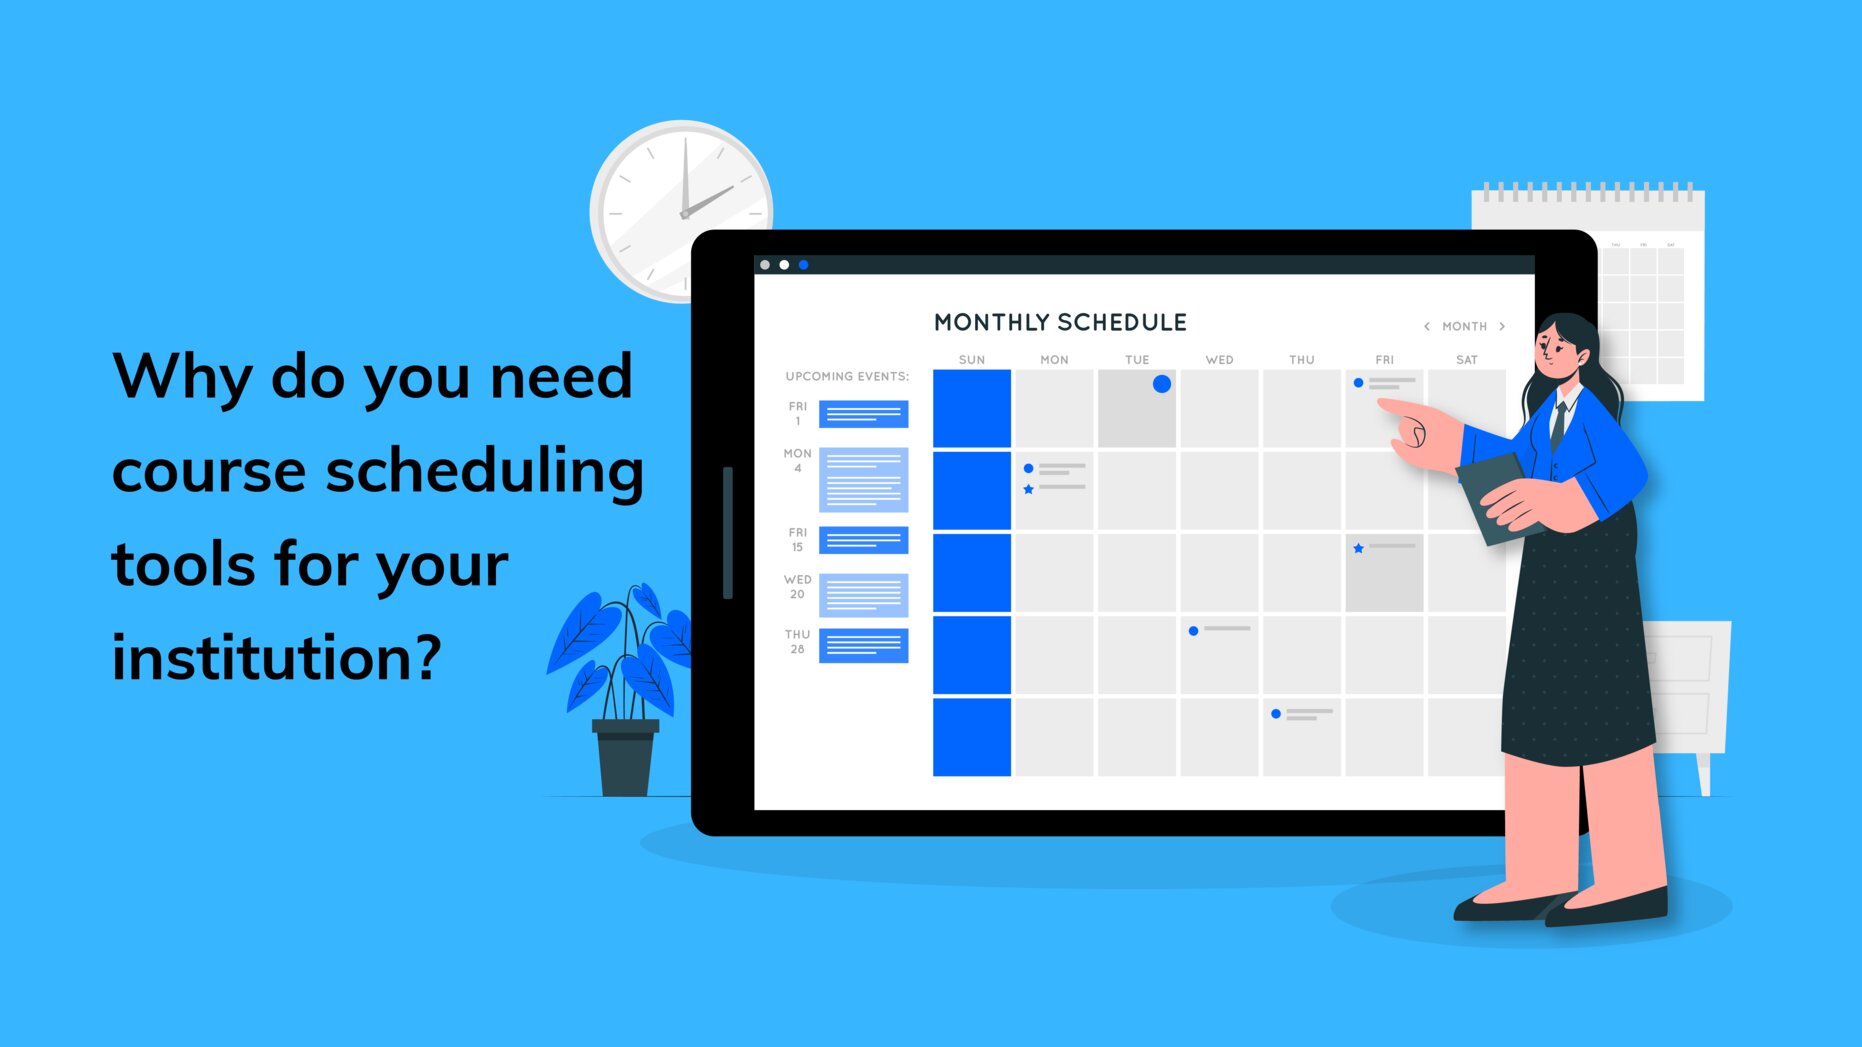 Why do you need course scheduling tools for your institution?